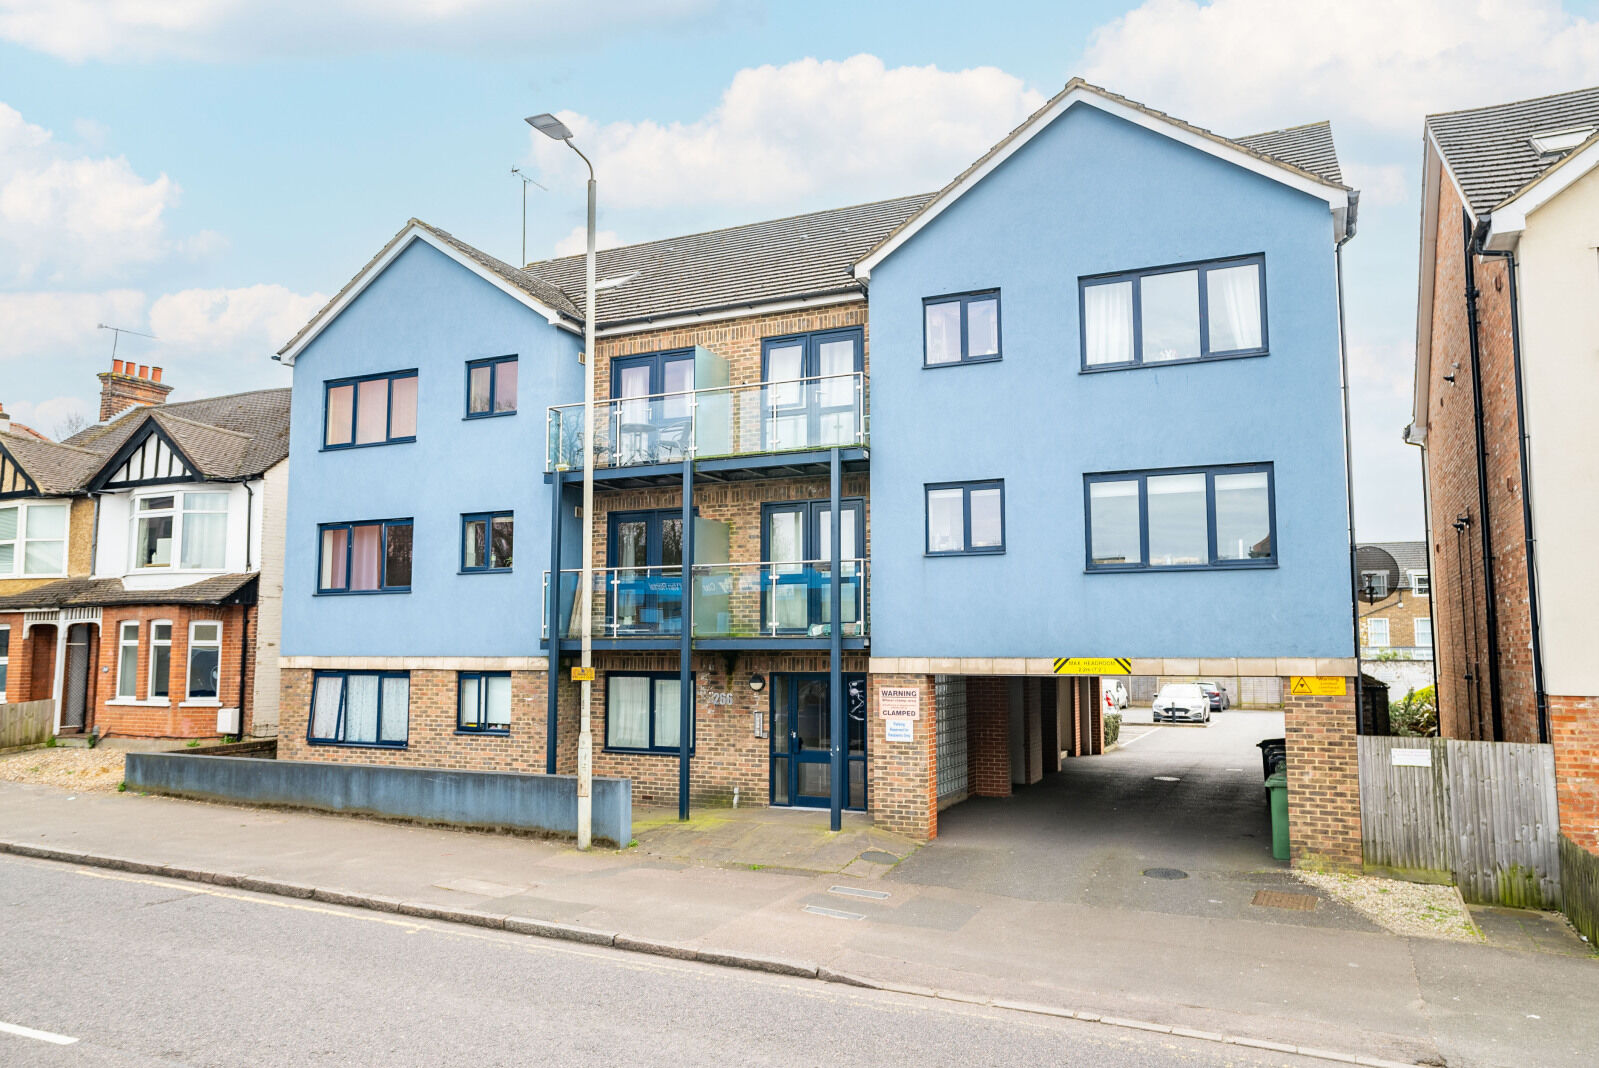 1 bedroom  flat to rent, Available now Hatfield Road, St. Albans, AL1, main image